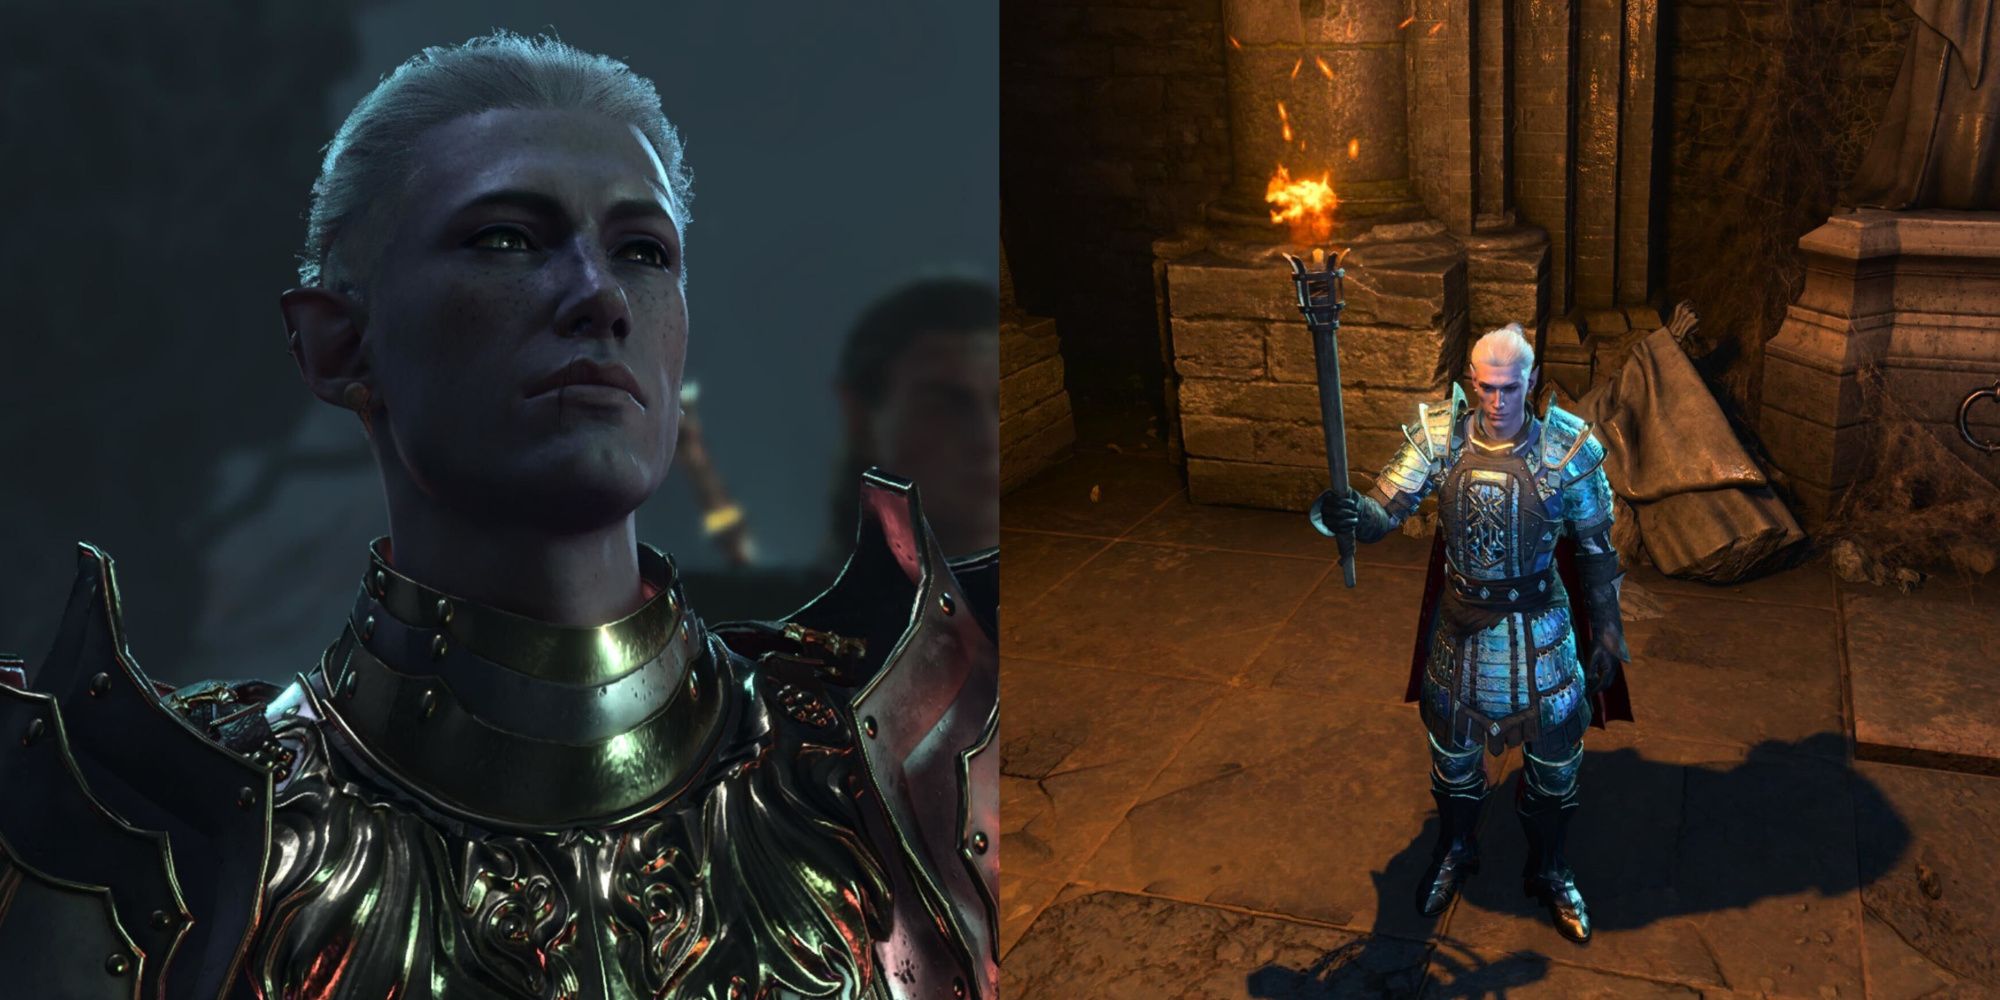 Baldur's Gate 3 split screen of a drow in the shadow-cursed lands and the drow holding a torch in ruins